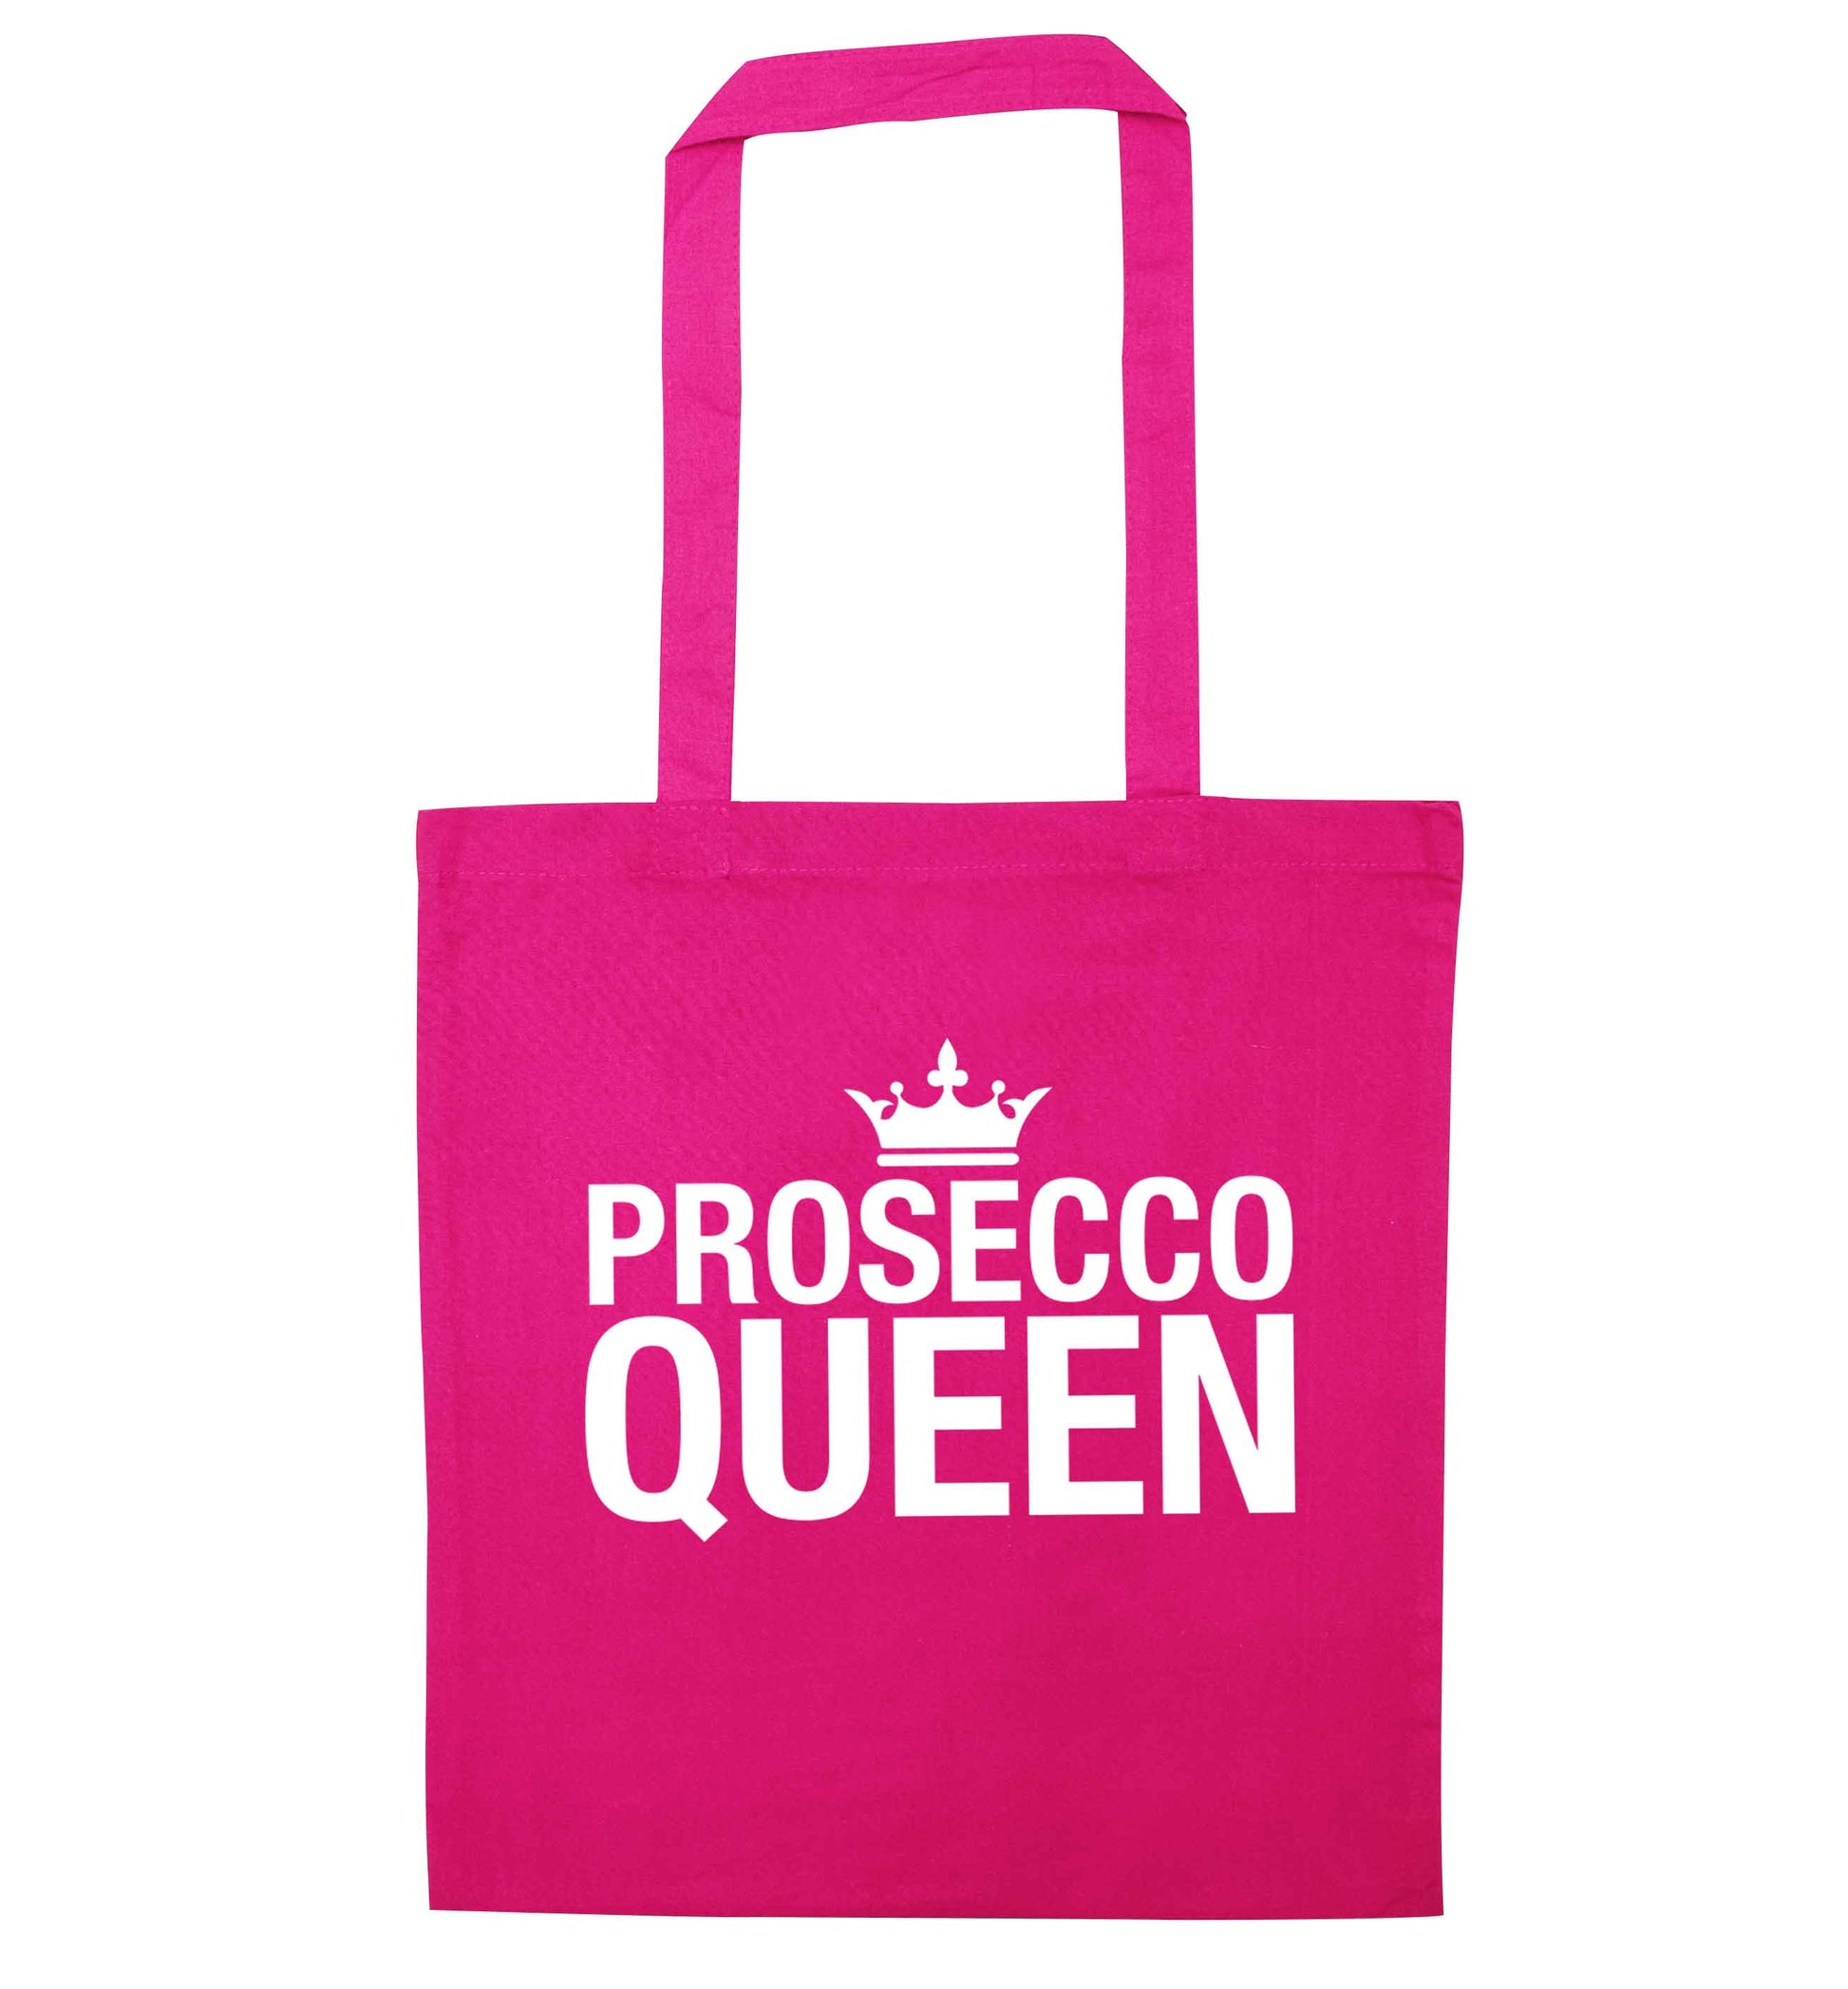 Prosecco queen pink tote bag